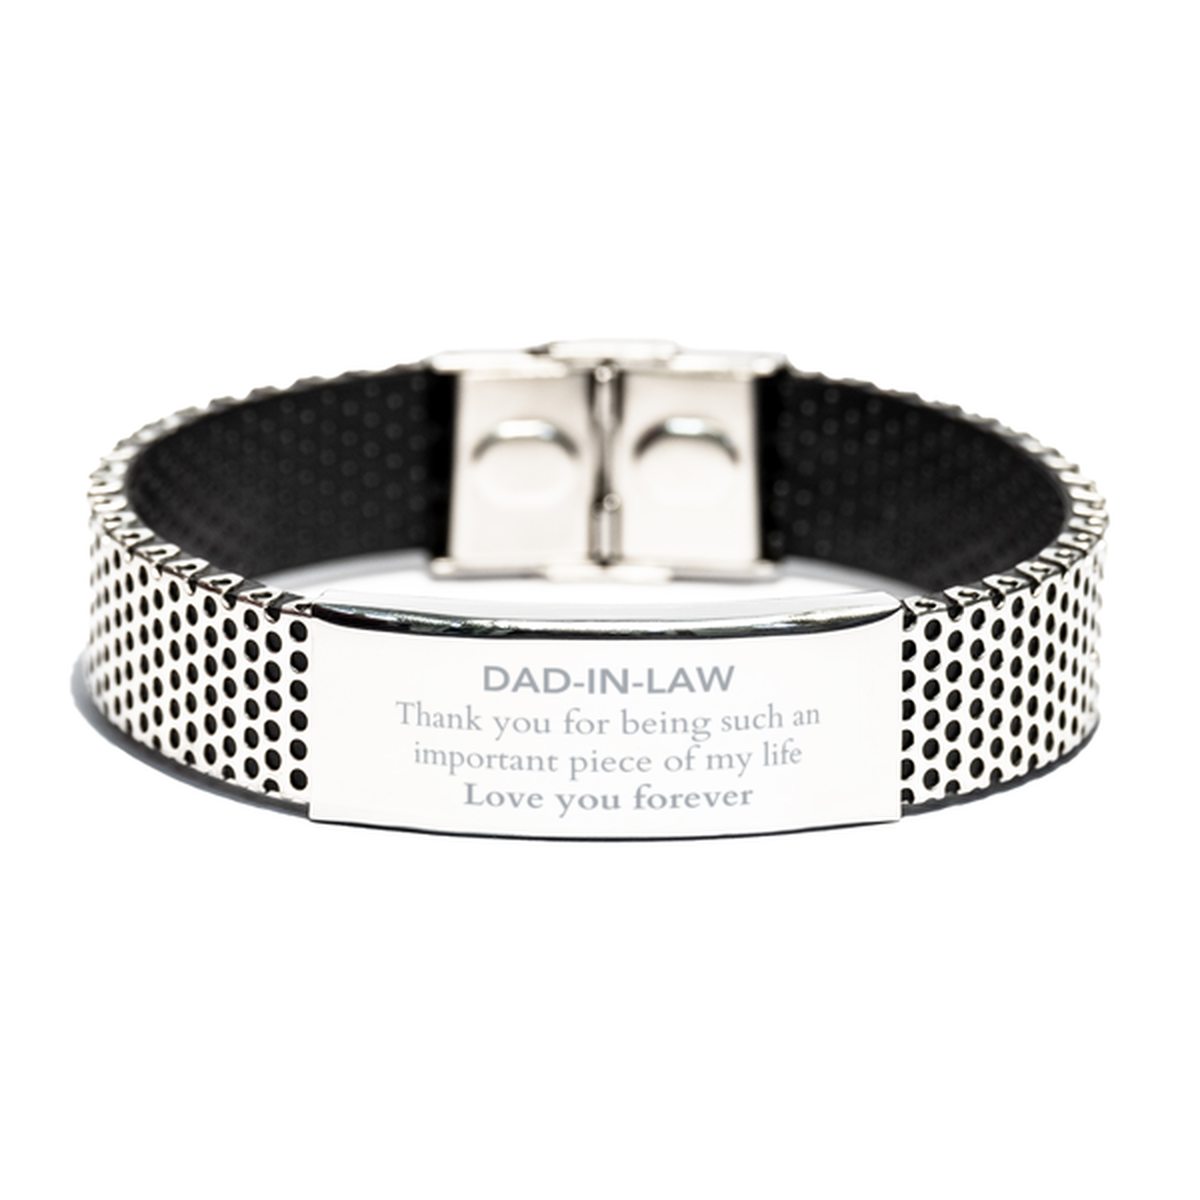 Appropriate Dad-in-law Stainless Steel Bracelet Epic Birthday Gifts for Dad-in-law Thank you for being such an important piece of my life Dad-in-law Christmas Mothers Fathers Day